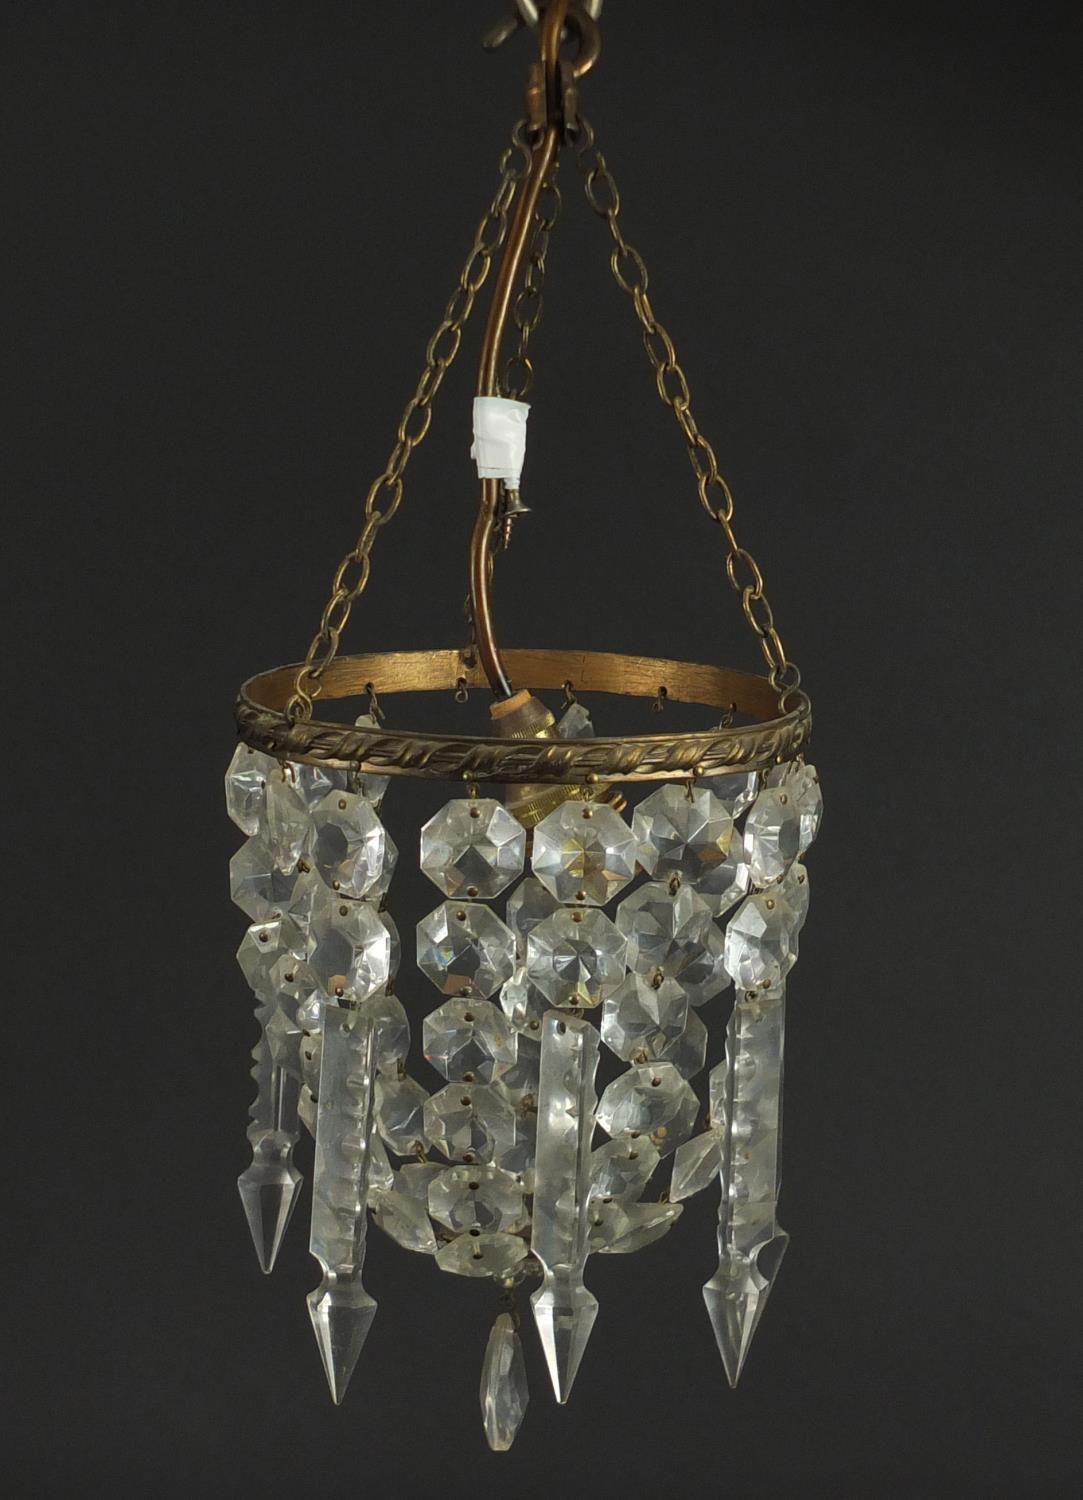 Two brass bag chandeliers with cut glass drops, the largest 20cm high x 16cm in diameter :For - Image 2 of 3